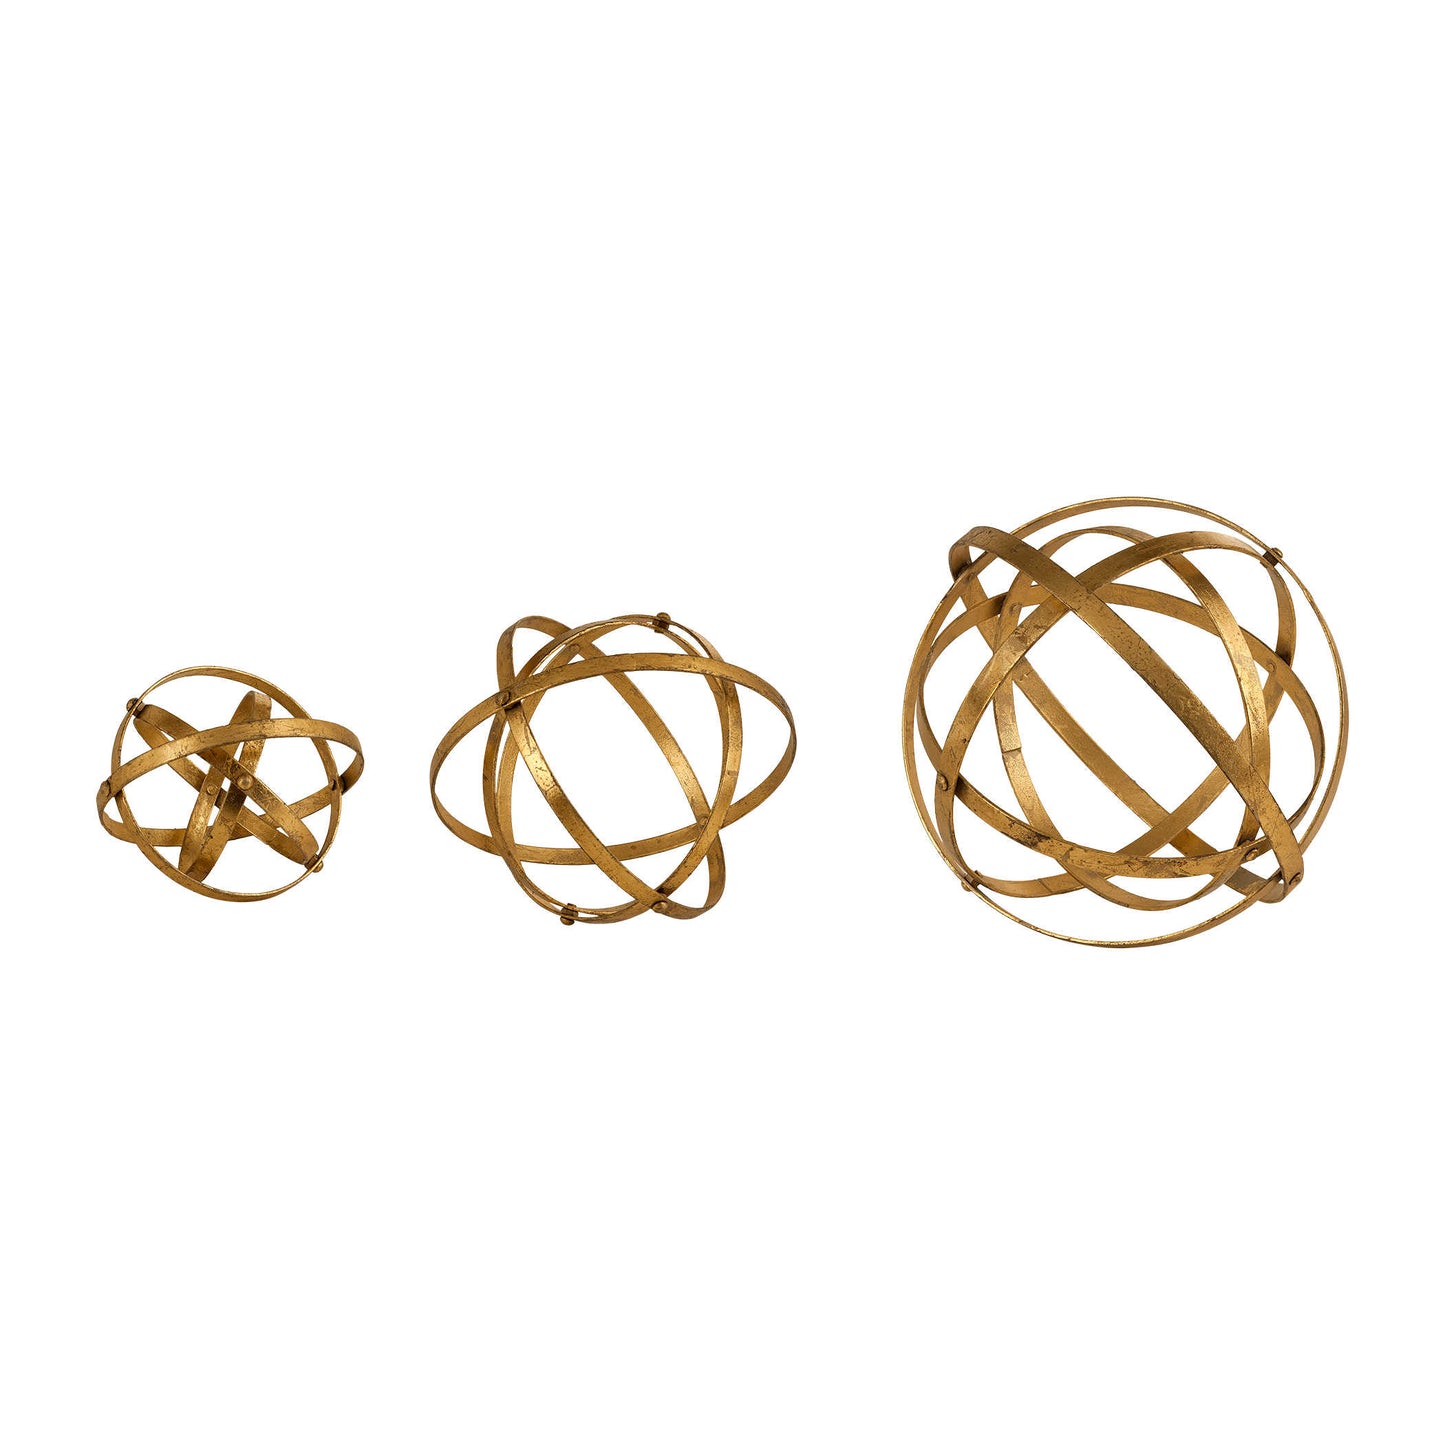 Stetson Spheres, Gold Set of 3